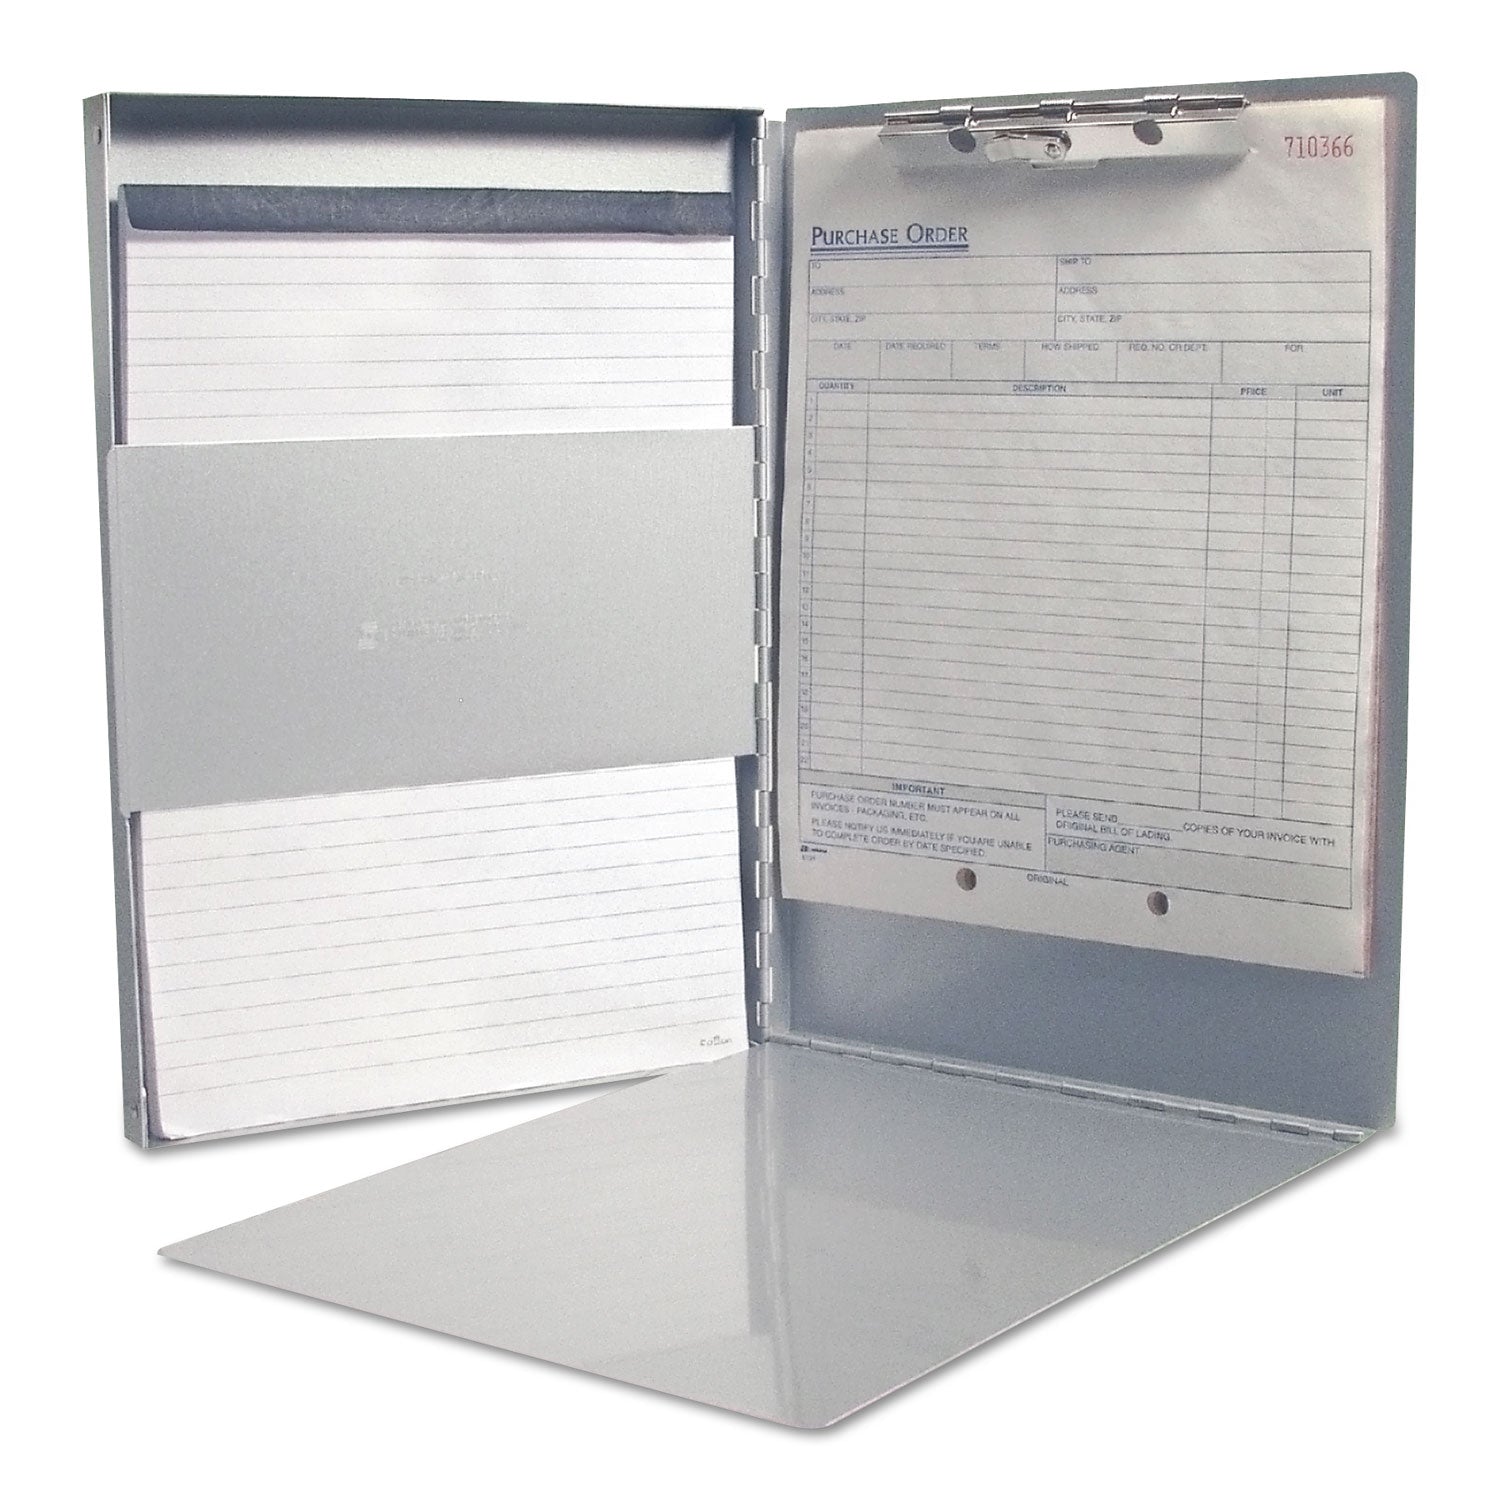 Snapak Aluminum Side-Open Forms Folder, 0.5" Clip Capacity, Holds 8.5 x 11 Sheets, Silver - 